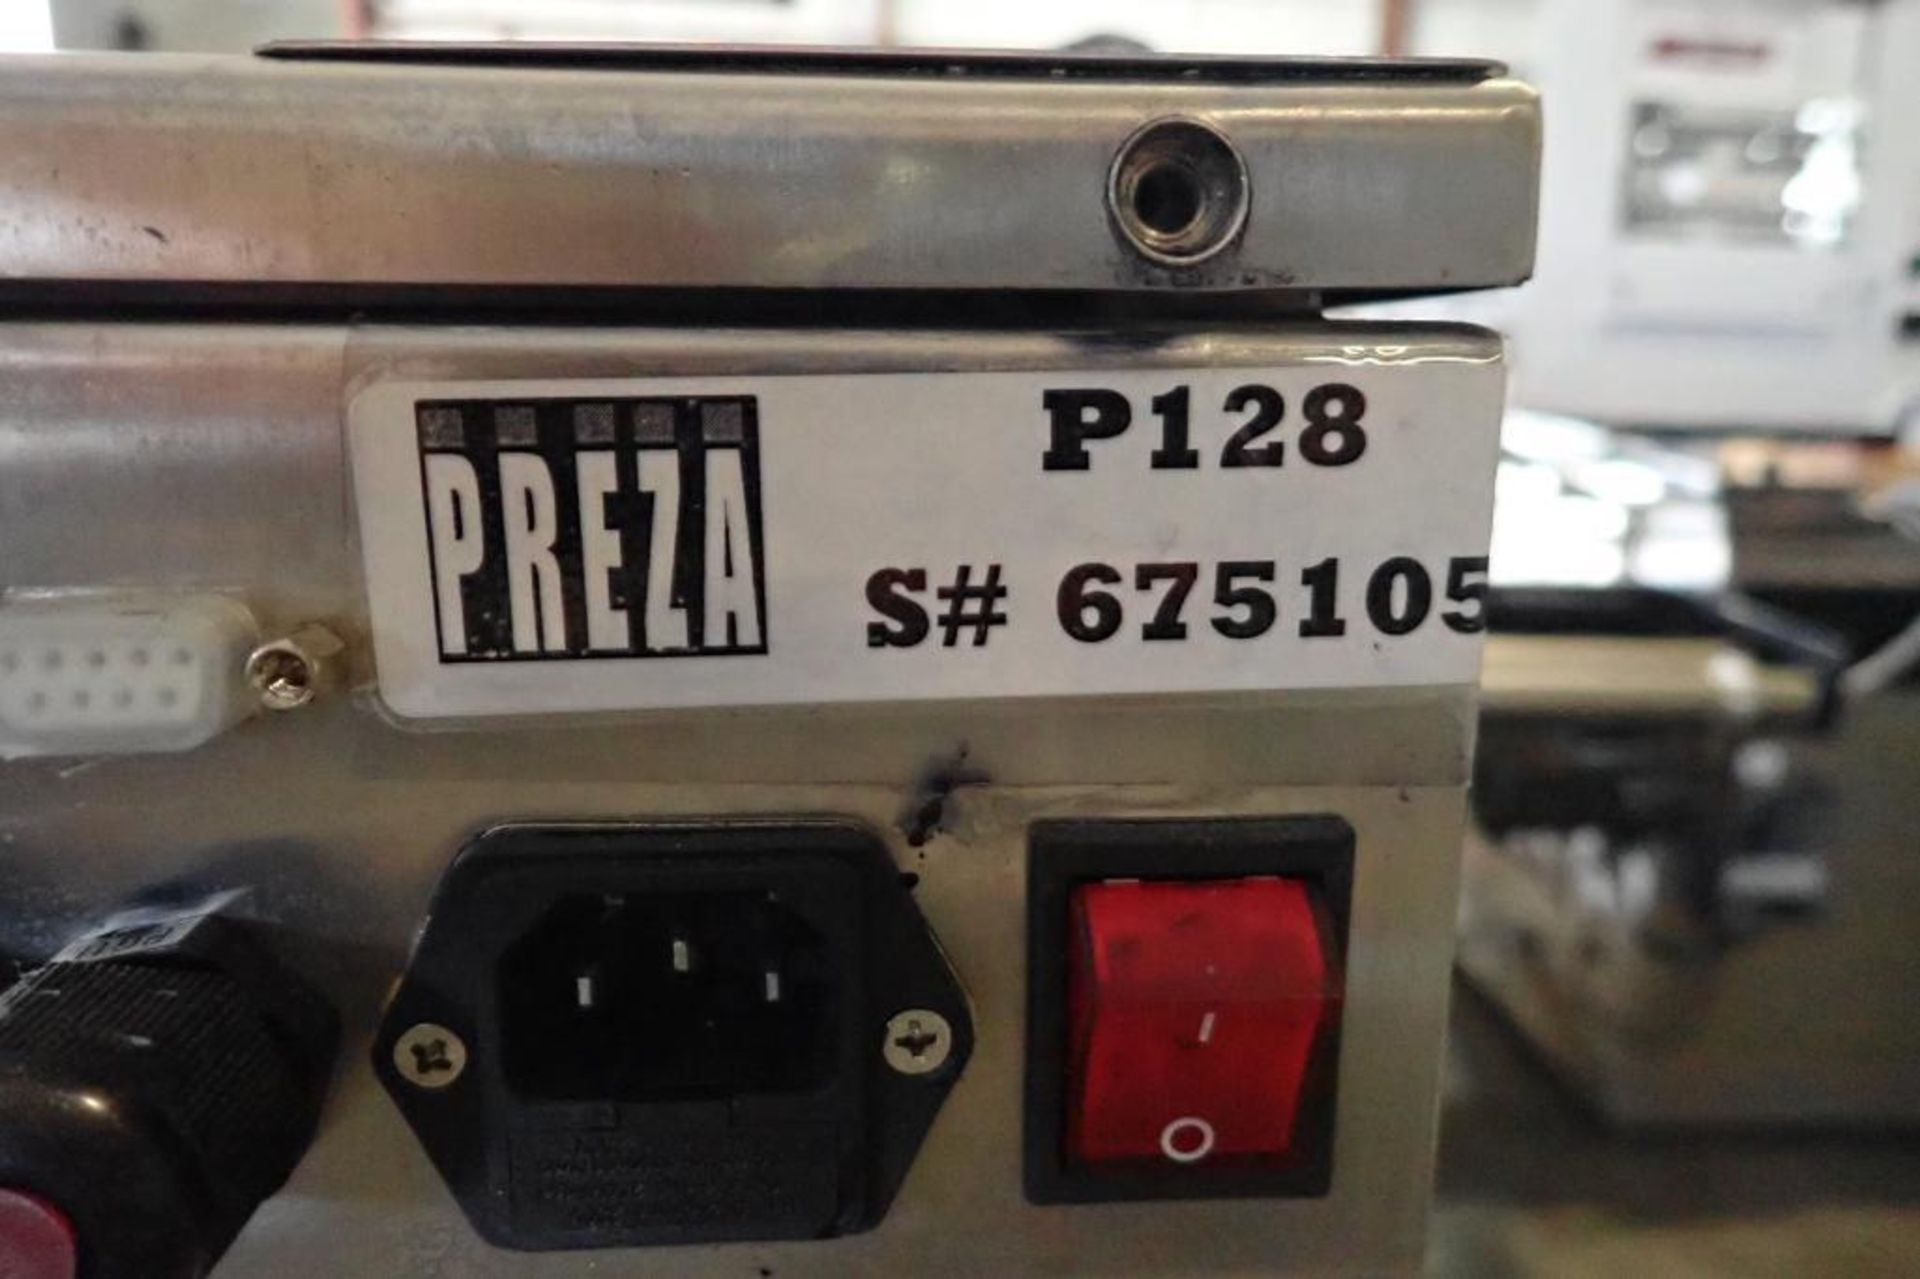 Preza easyjet ink jet coder, Model P128, touch screen, only 2 have ink heads, adjustable stands { - Image 12 of 16